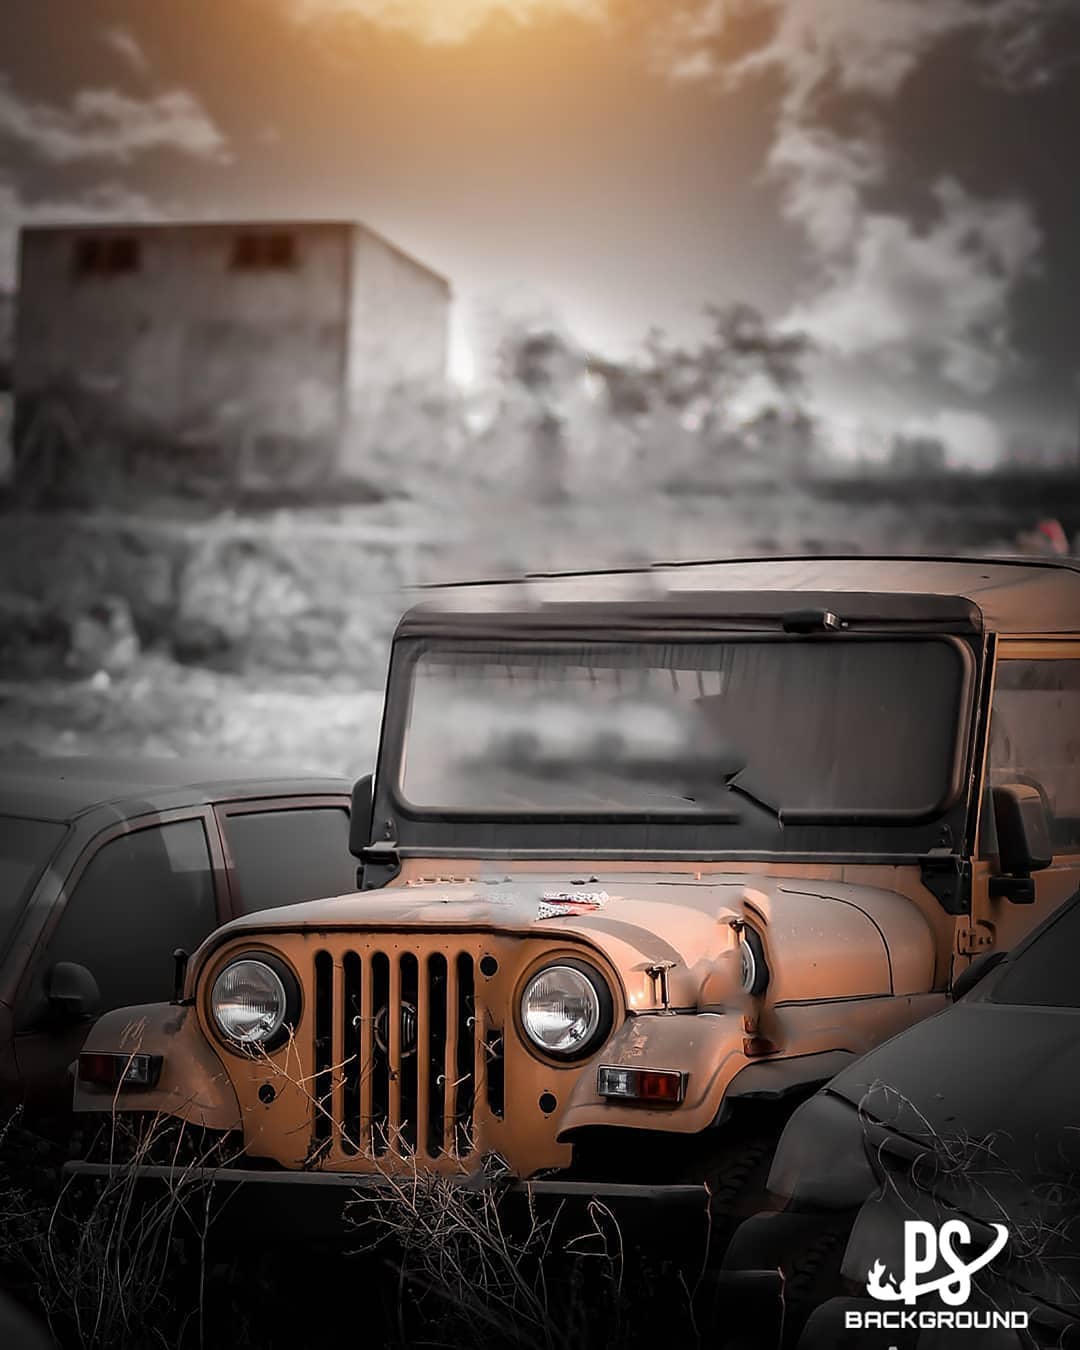 Red Jeep PicsArt Background Free Stock Image